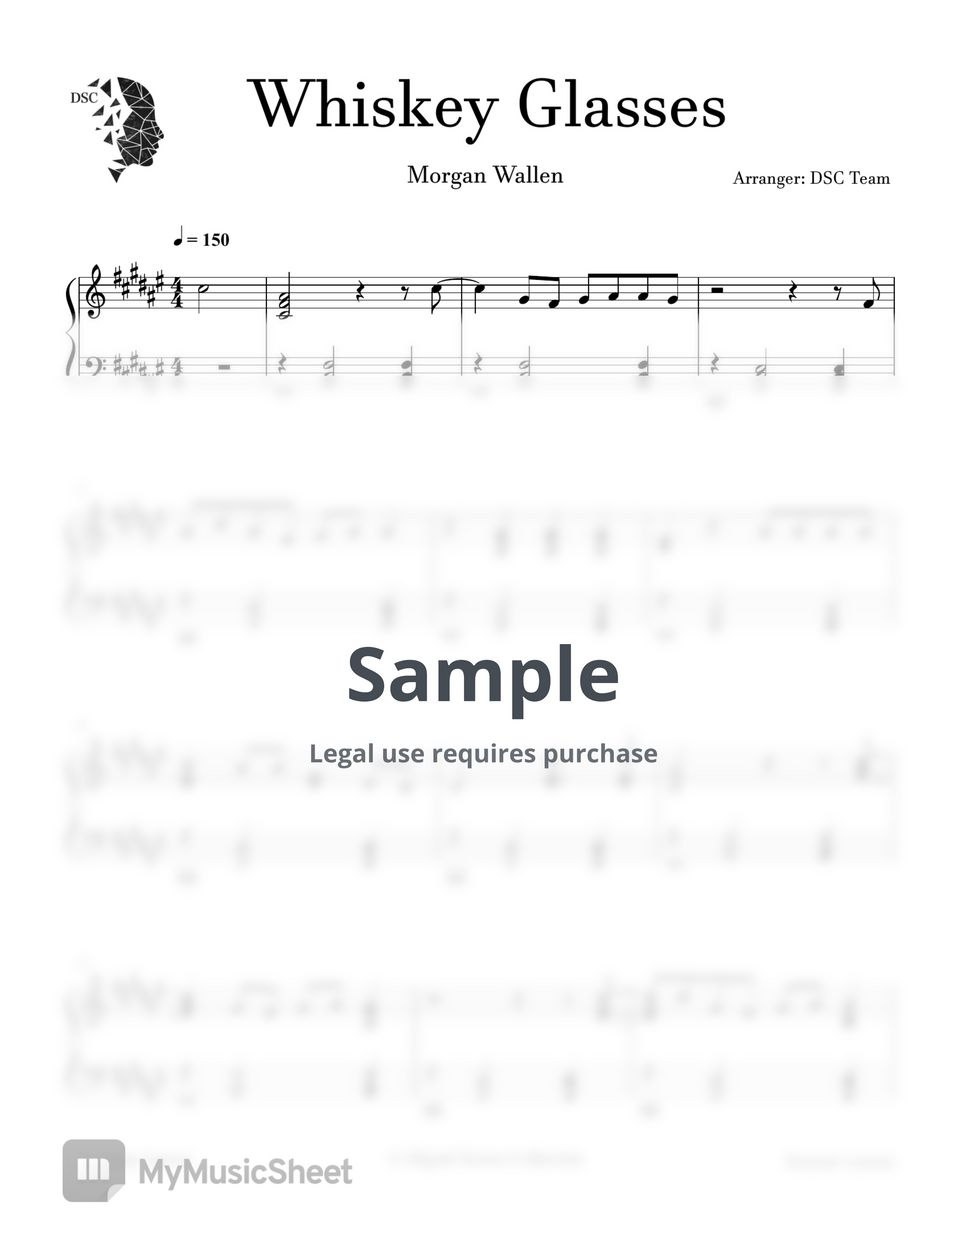 Morgan Wallen - Whiskey Glasses by Digital Scores Collection